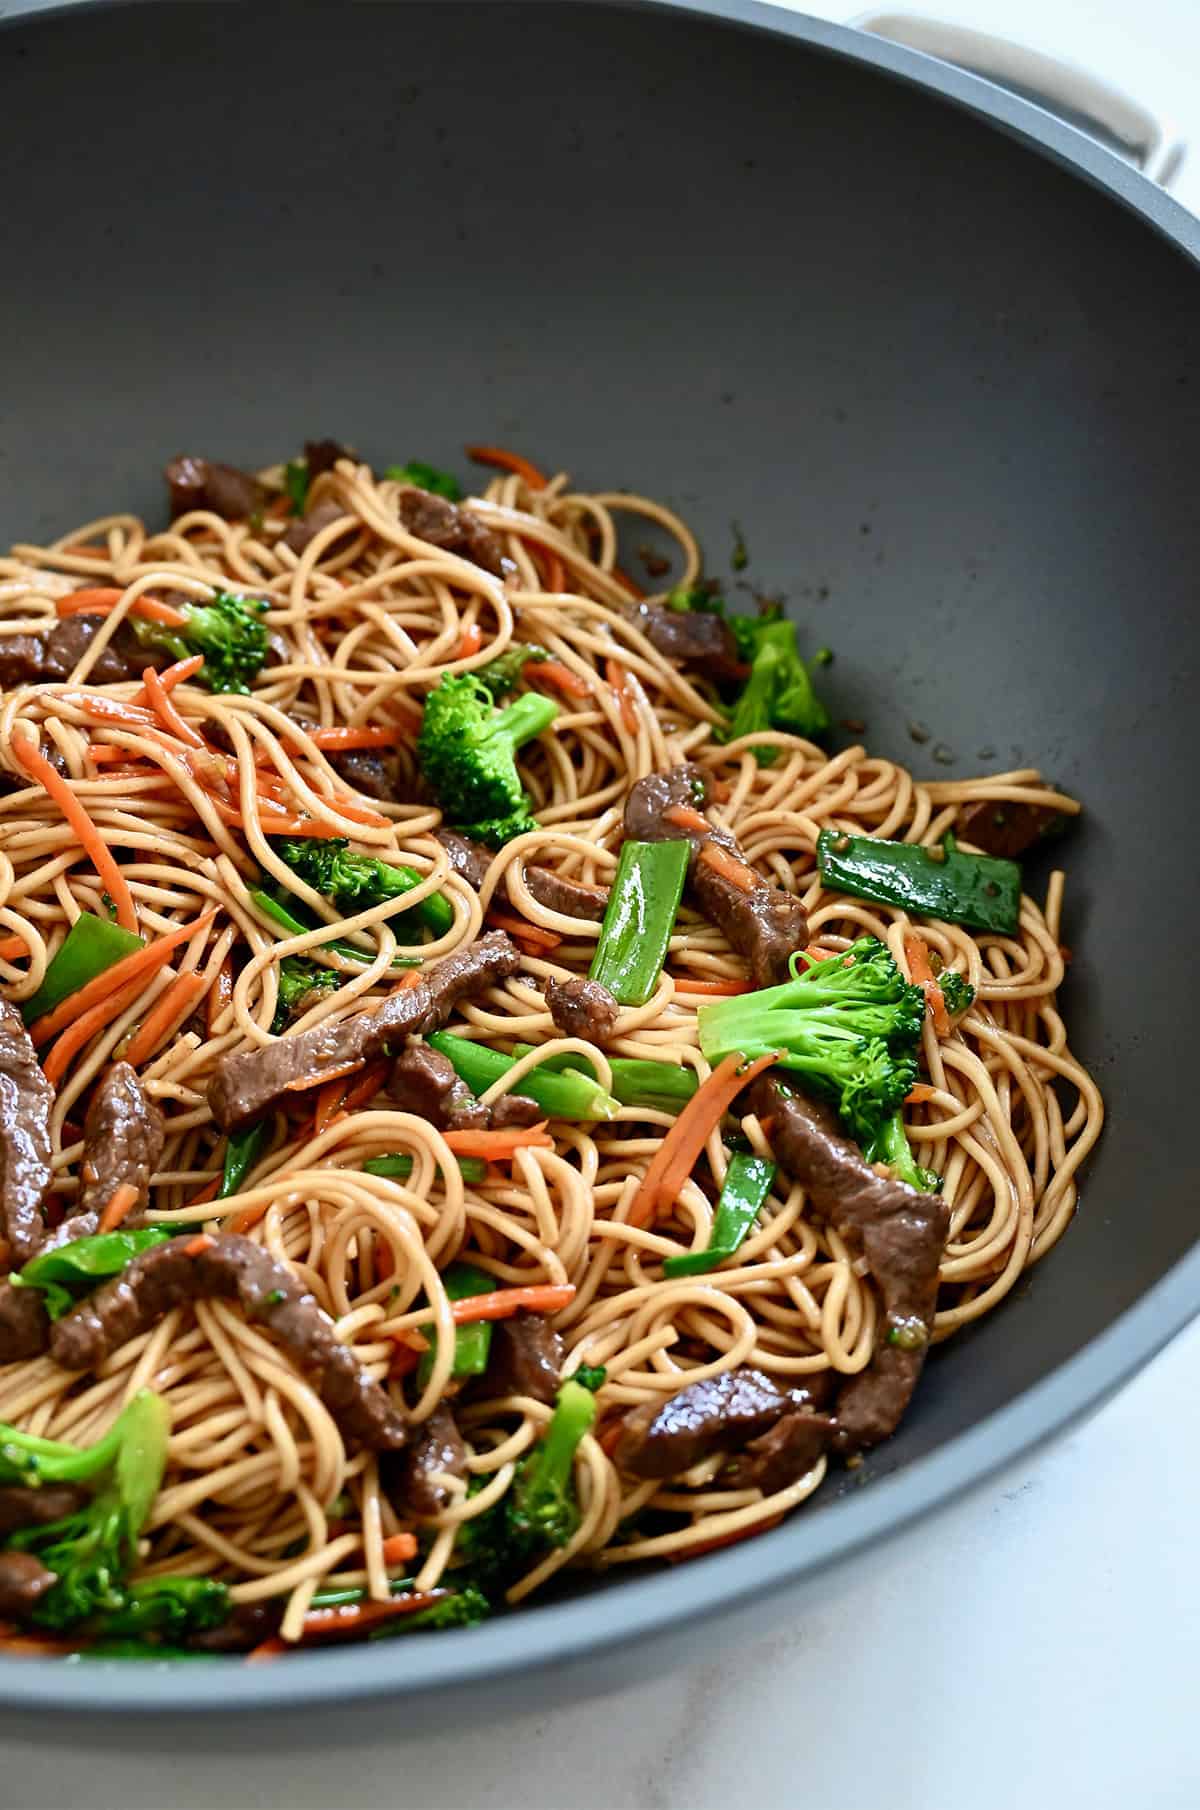 Stir-fried lo mein noodles with beef, broccoli and shredded carrots.